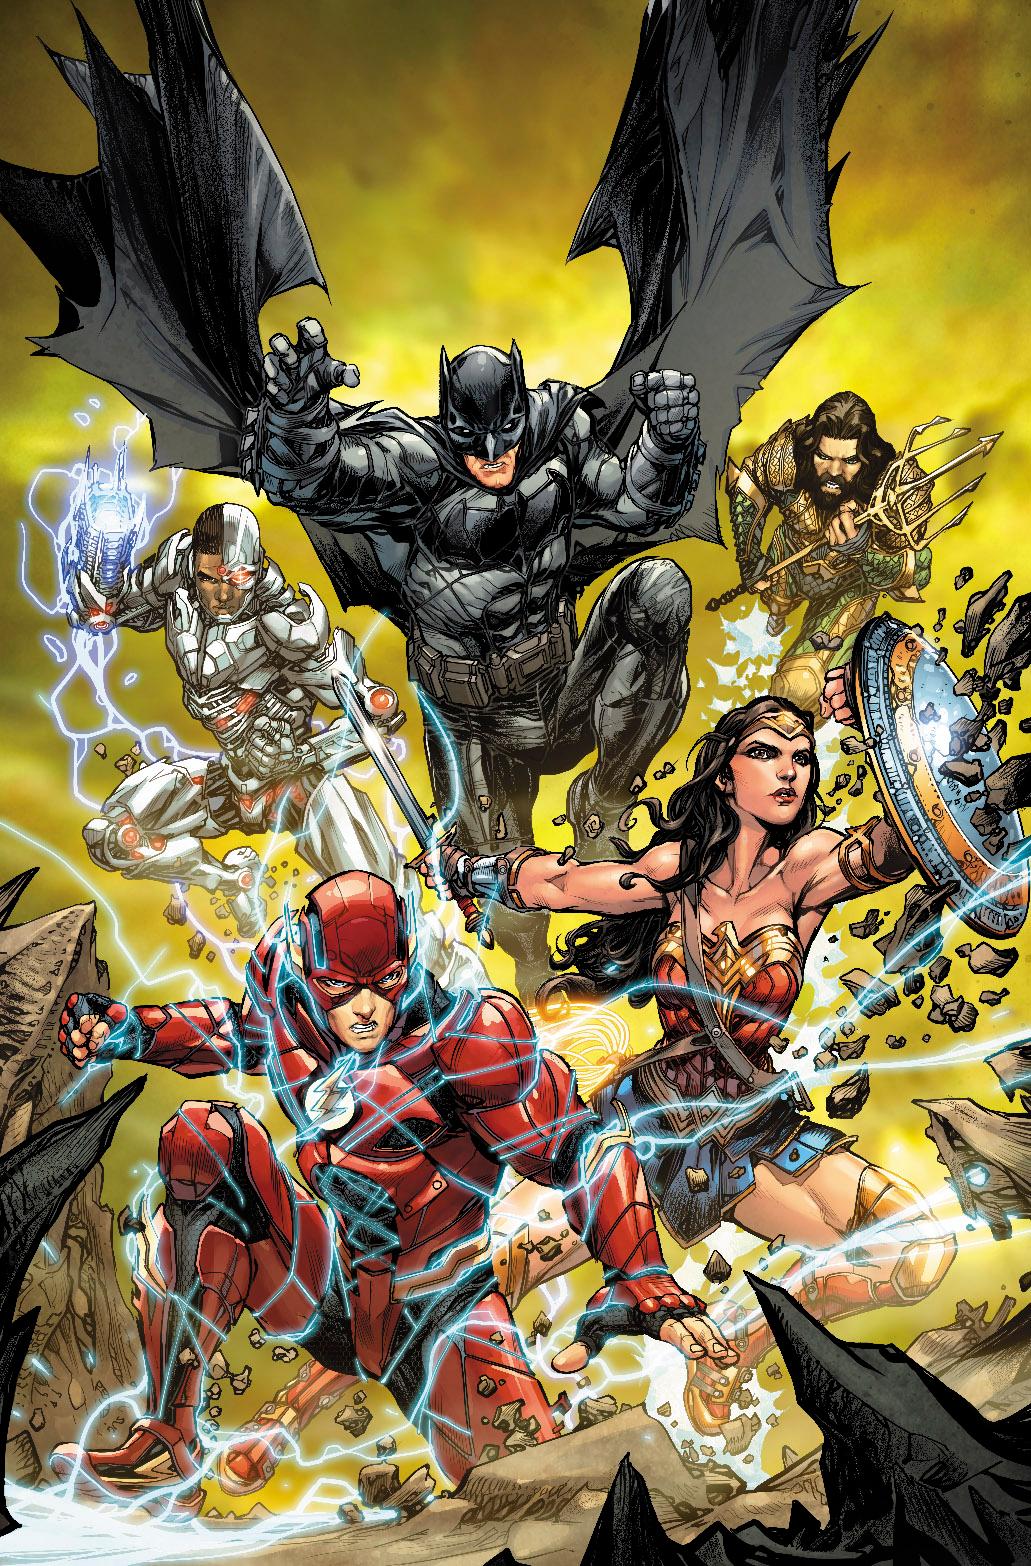 Justice League Empire Magazine Cover Wallpapers